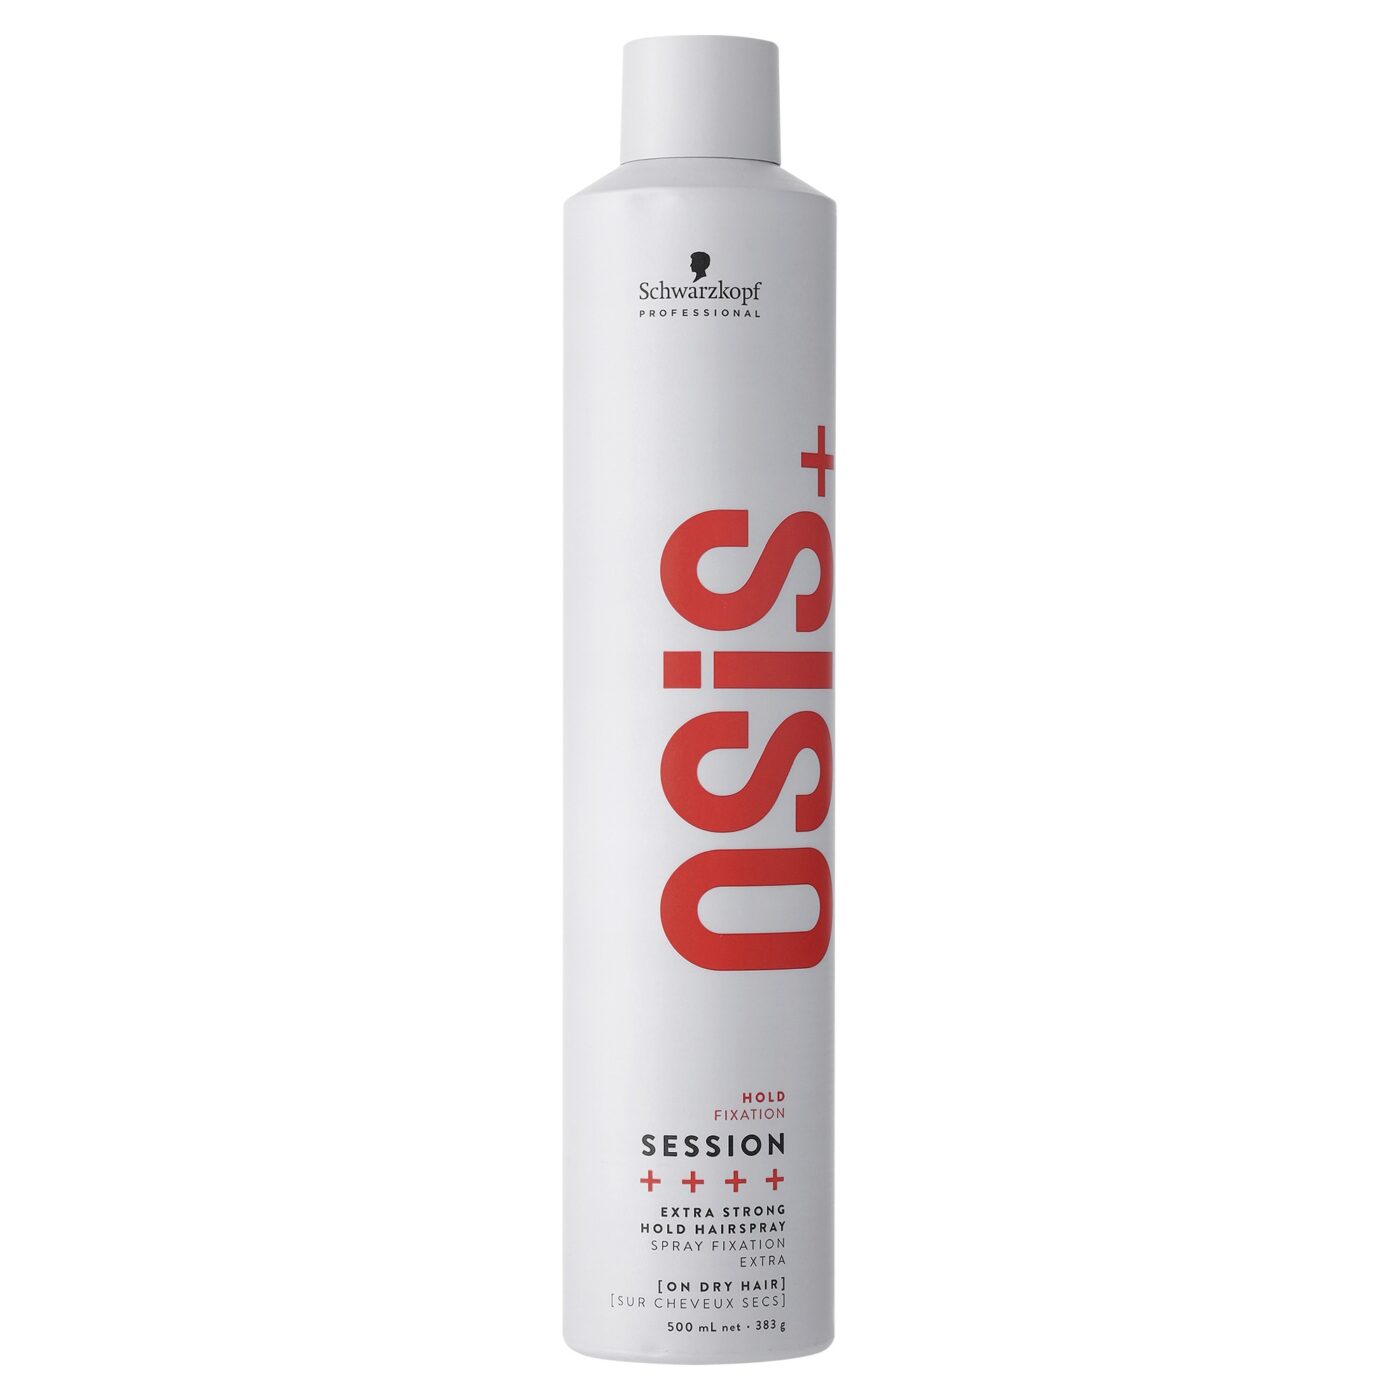 OSiS+ Session 500ml